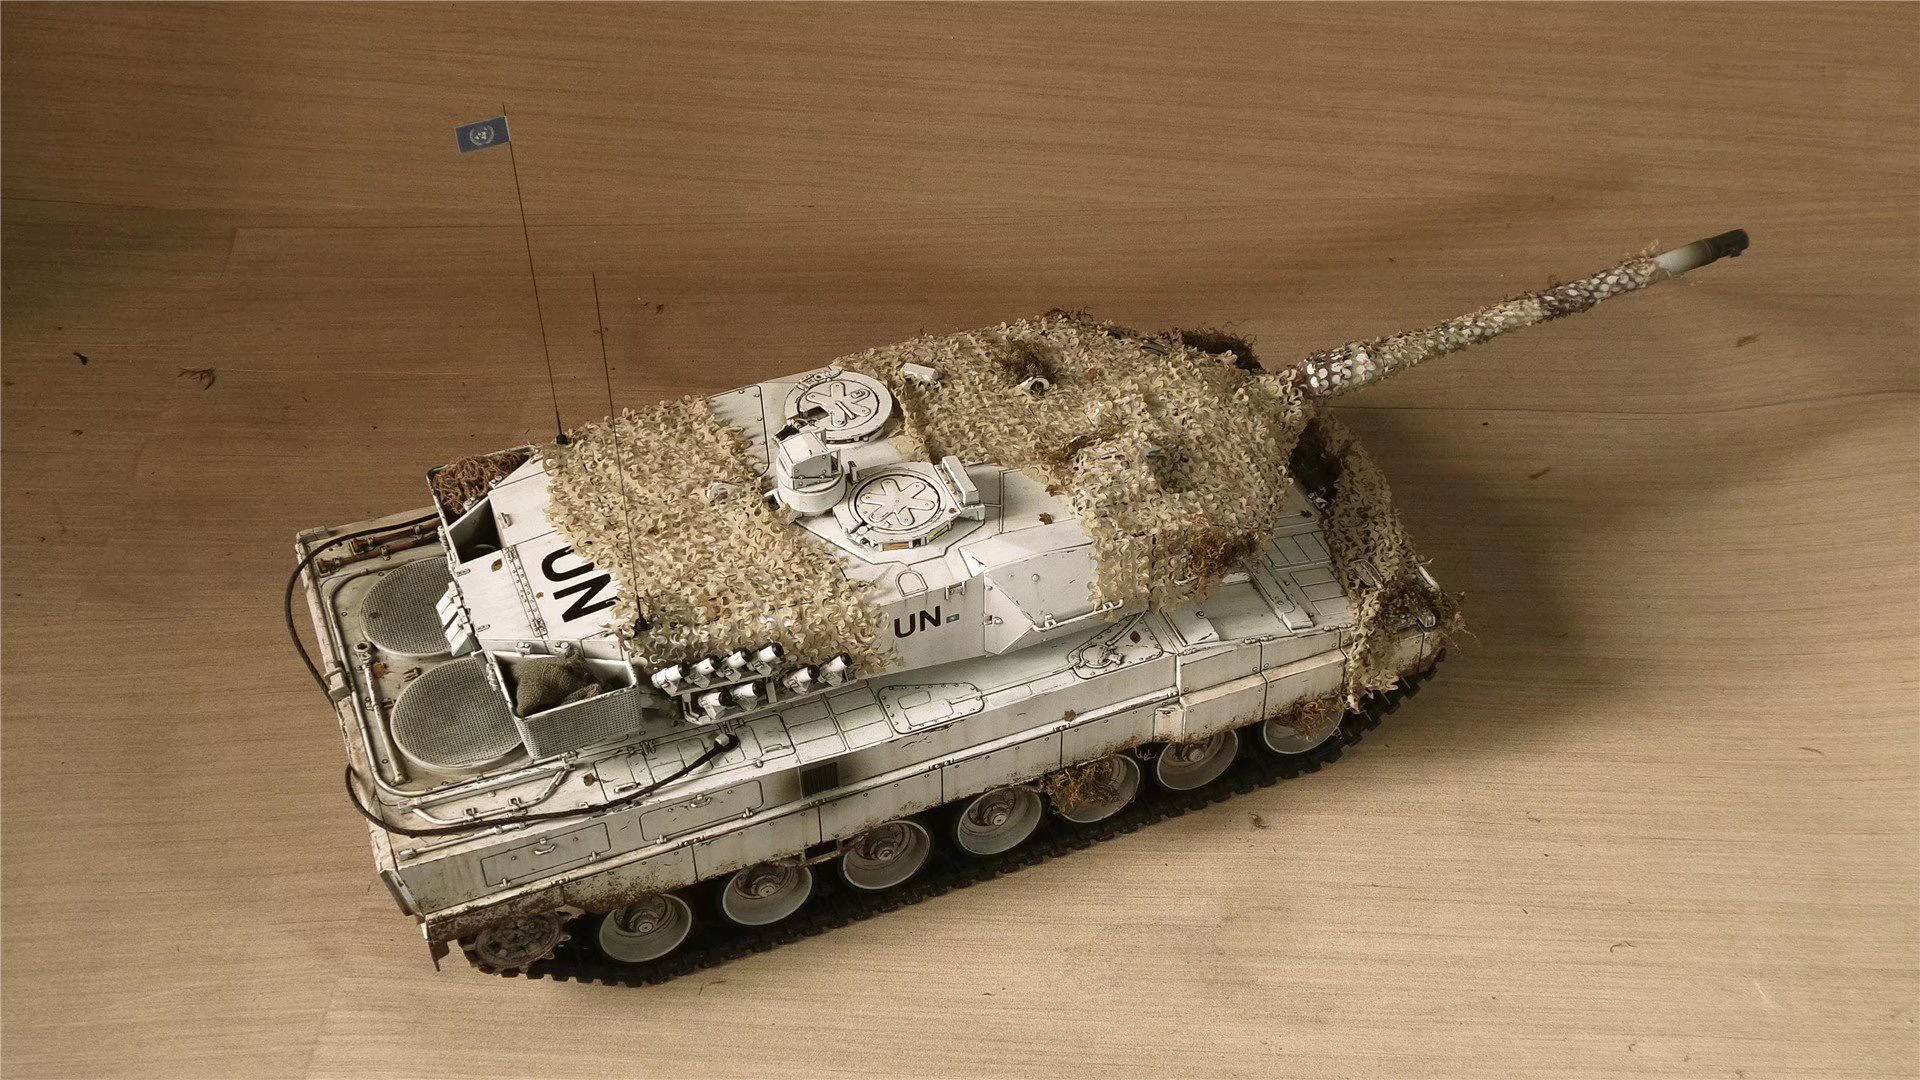 99% like the real Leopard 2A6 tank, Professional Full Metal Leopard 2 RC Tank Scale model, With Tank Gun Stabilizer / Gun Stabilization System & RC Tank Raise Their Gun Barrels After Firing, Custom Paint UN White Color Coating